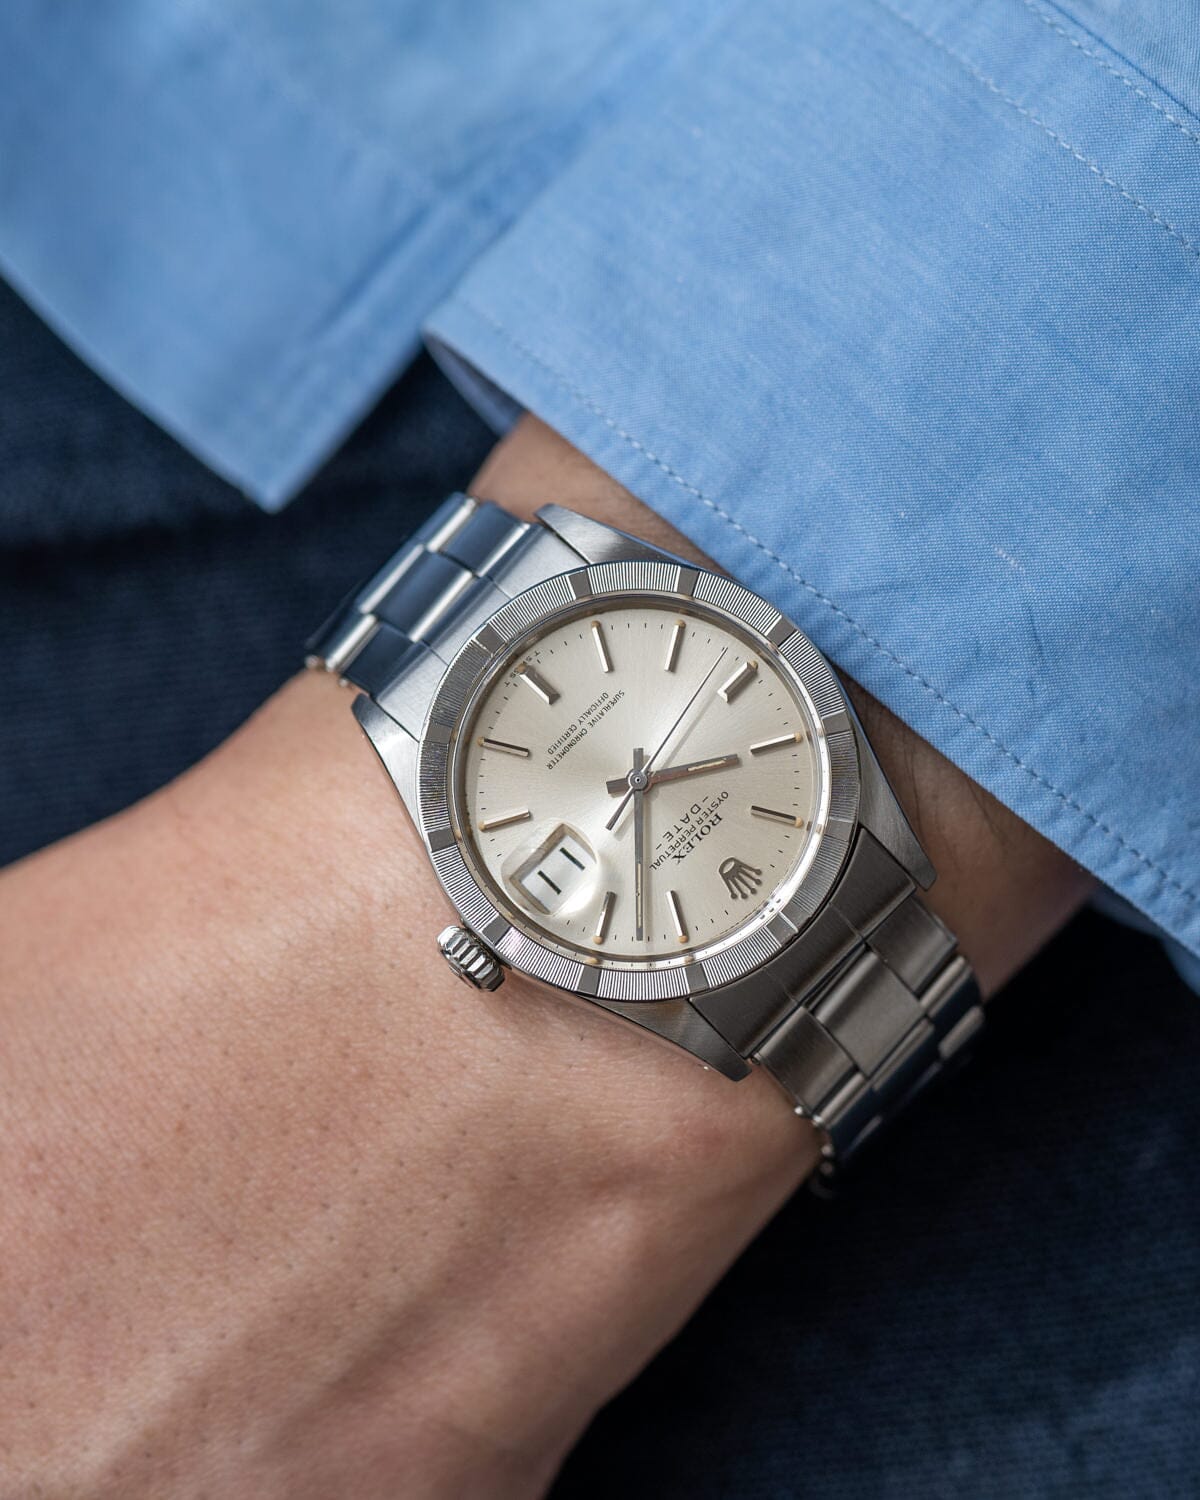 Rolex Oyster Perpetual Date 1501 Silver Dial with Riveted Bracelet Watch ROLEX 